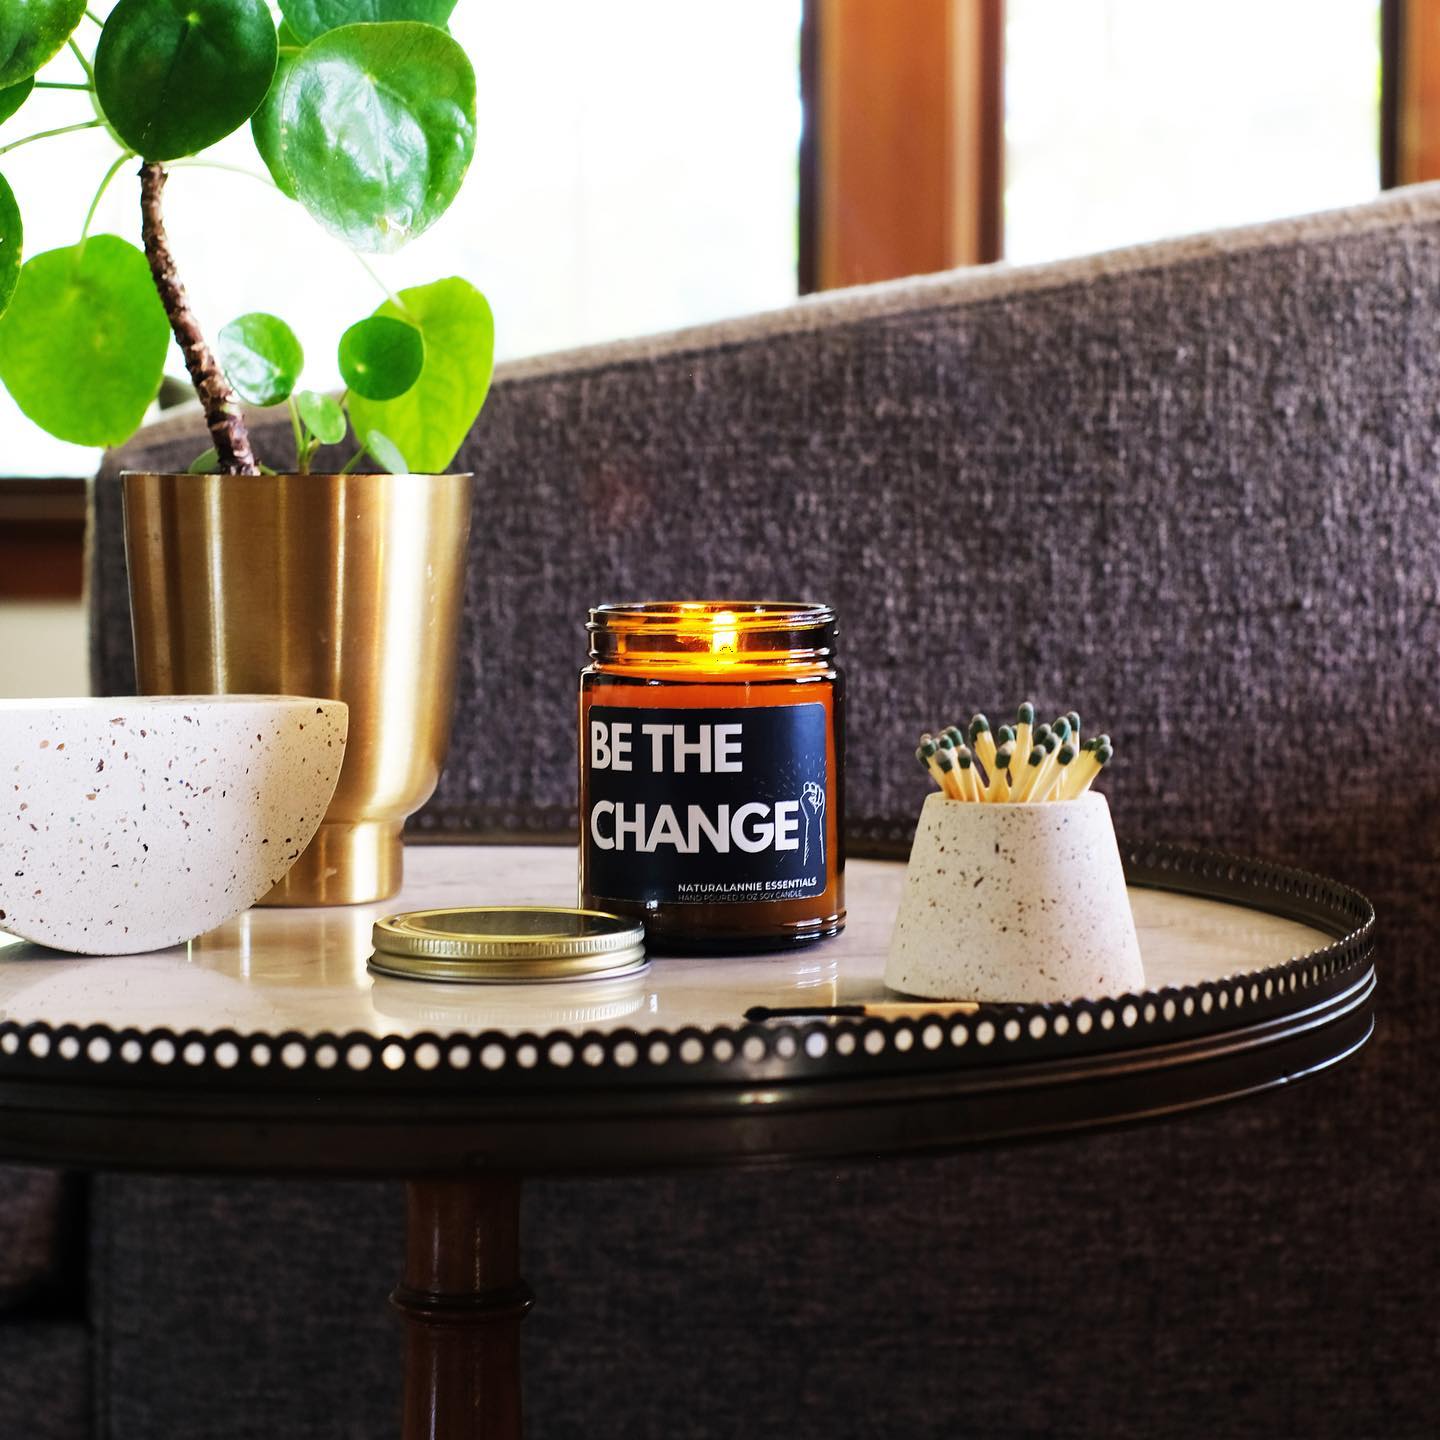 BE THE CHANGE SOY CANDLE TO SUPPORT THE BLACK LIVES MATTER MOVEMENT